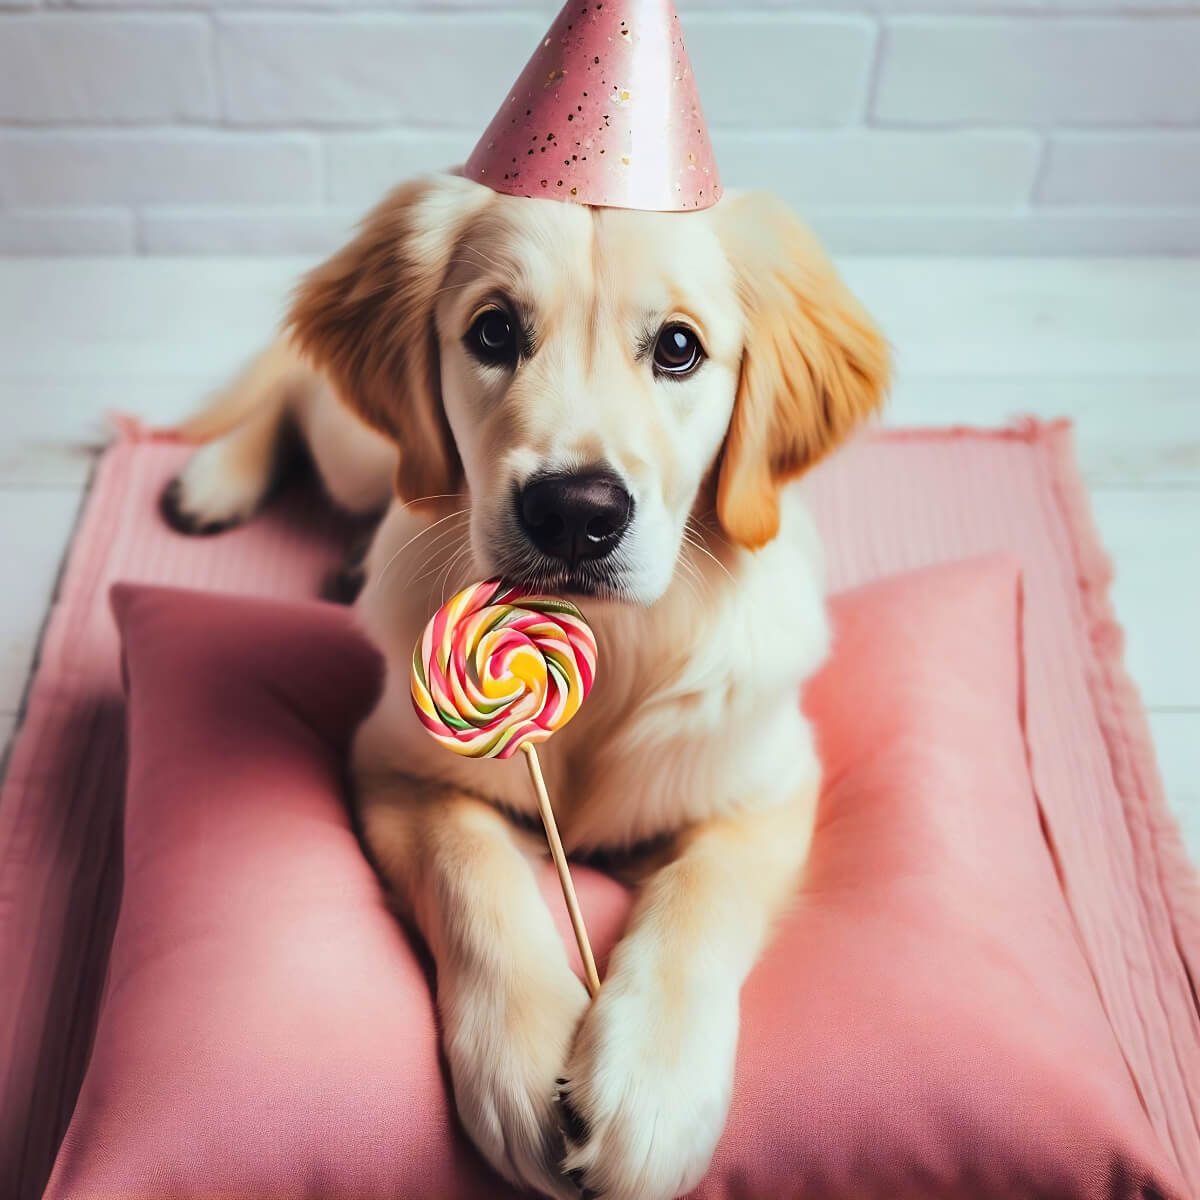 Young Labrador dog with a lollipop, wearing a party hat, led on cushions.